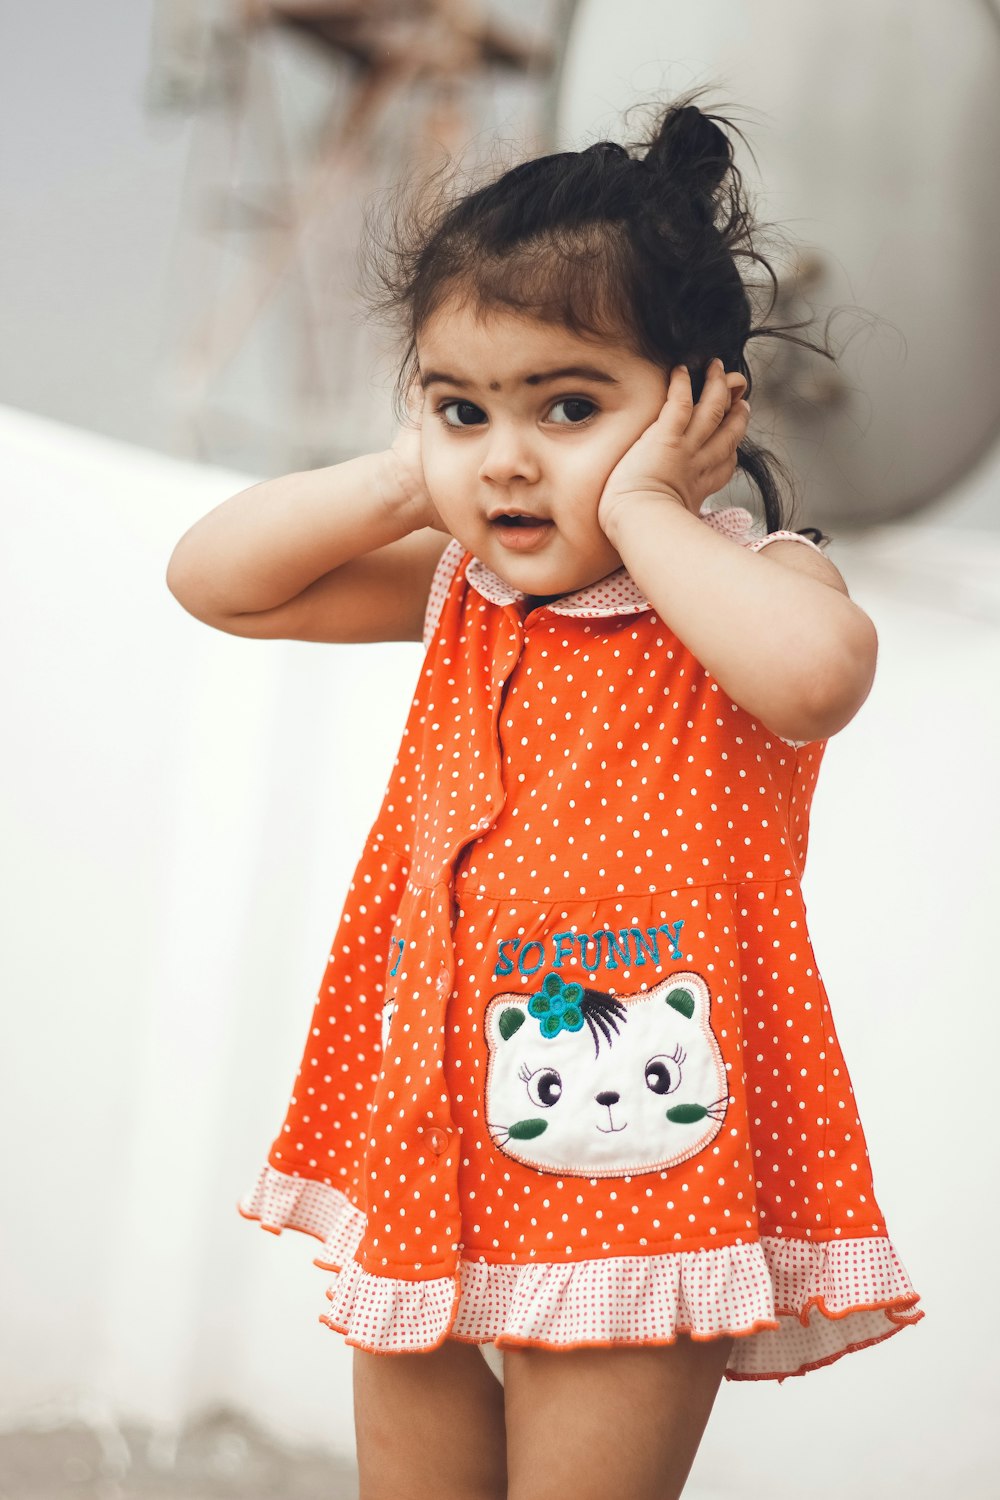 1000+ Cute Baby Girl Pictures | Download Free Images on Unsplash